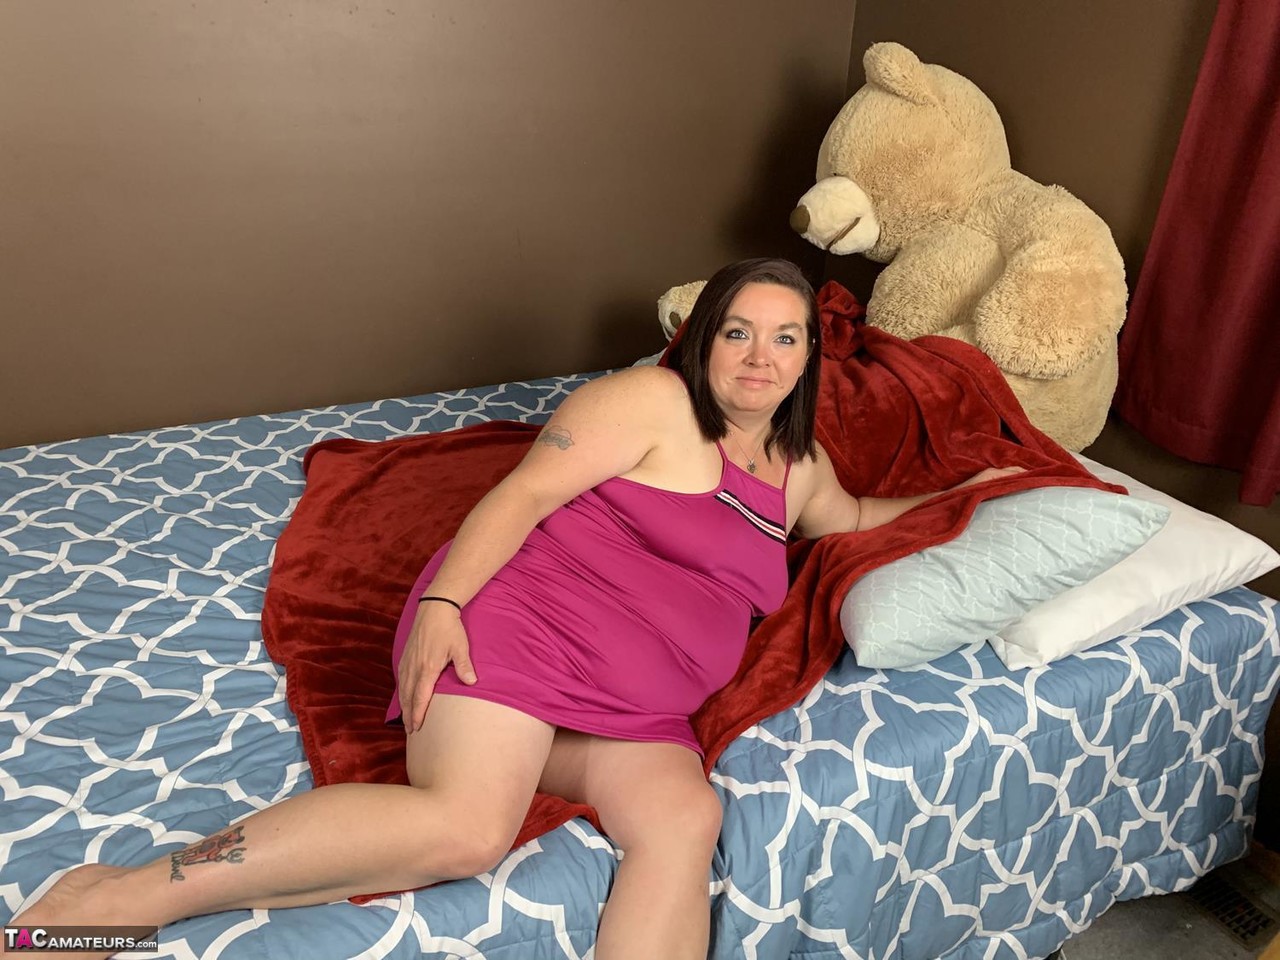 Mature BBW Sexy NE BBW spreads her pussy on a bed after showing her big ass photo porno #422697952 | TAC Amateurs Pics, Sexy NE BBW, BBW, porno mobile